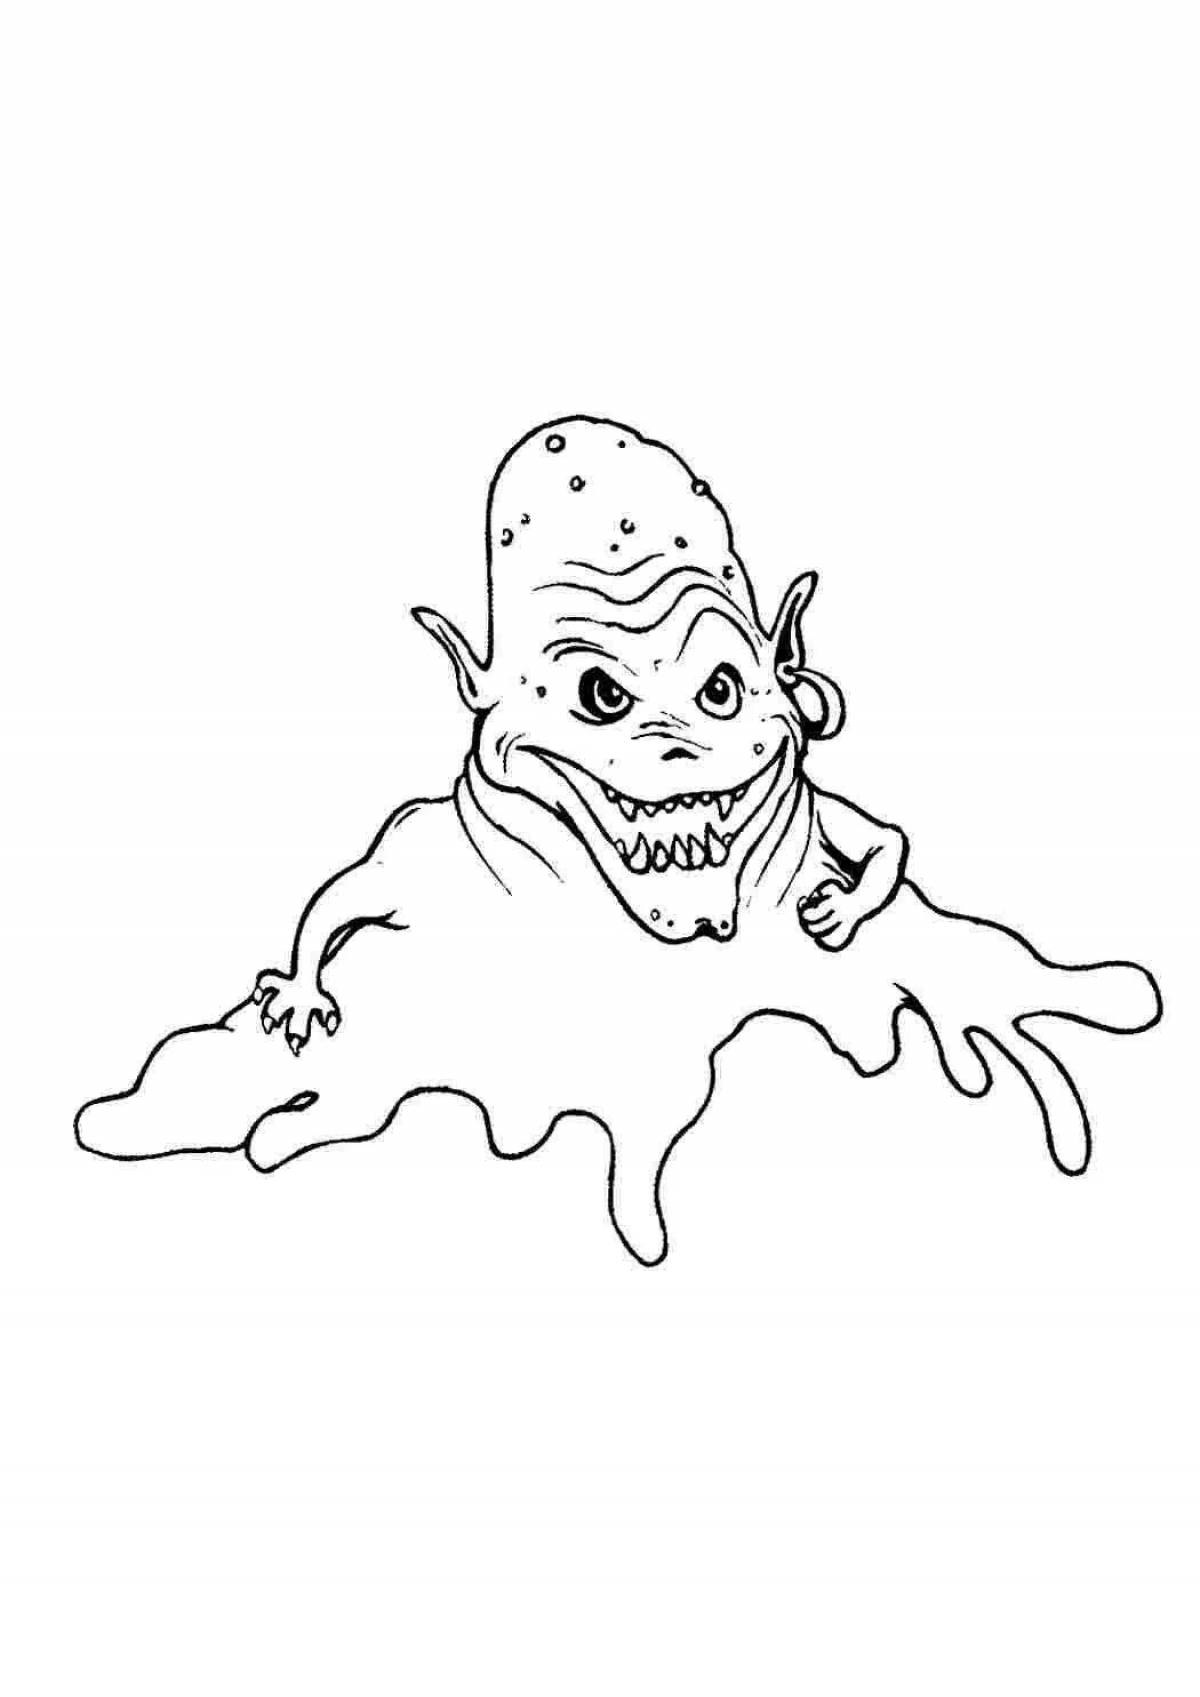 Disgusting scary child coloring book